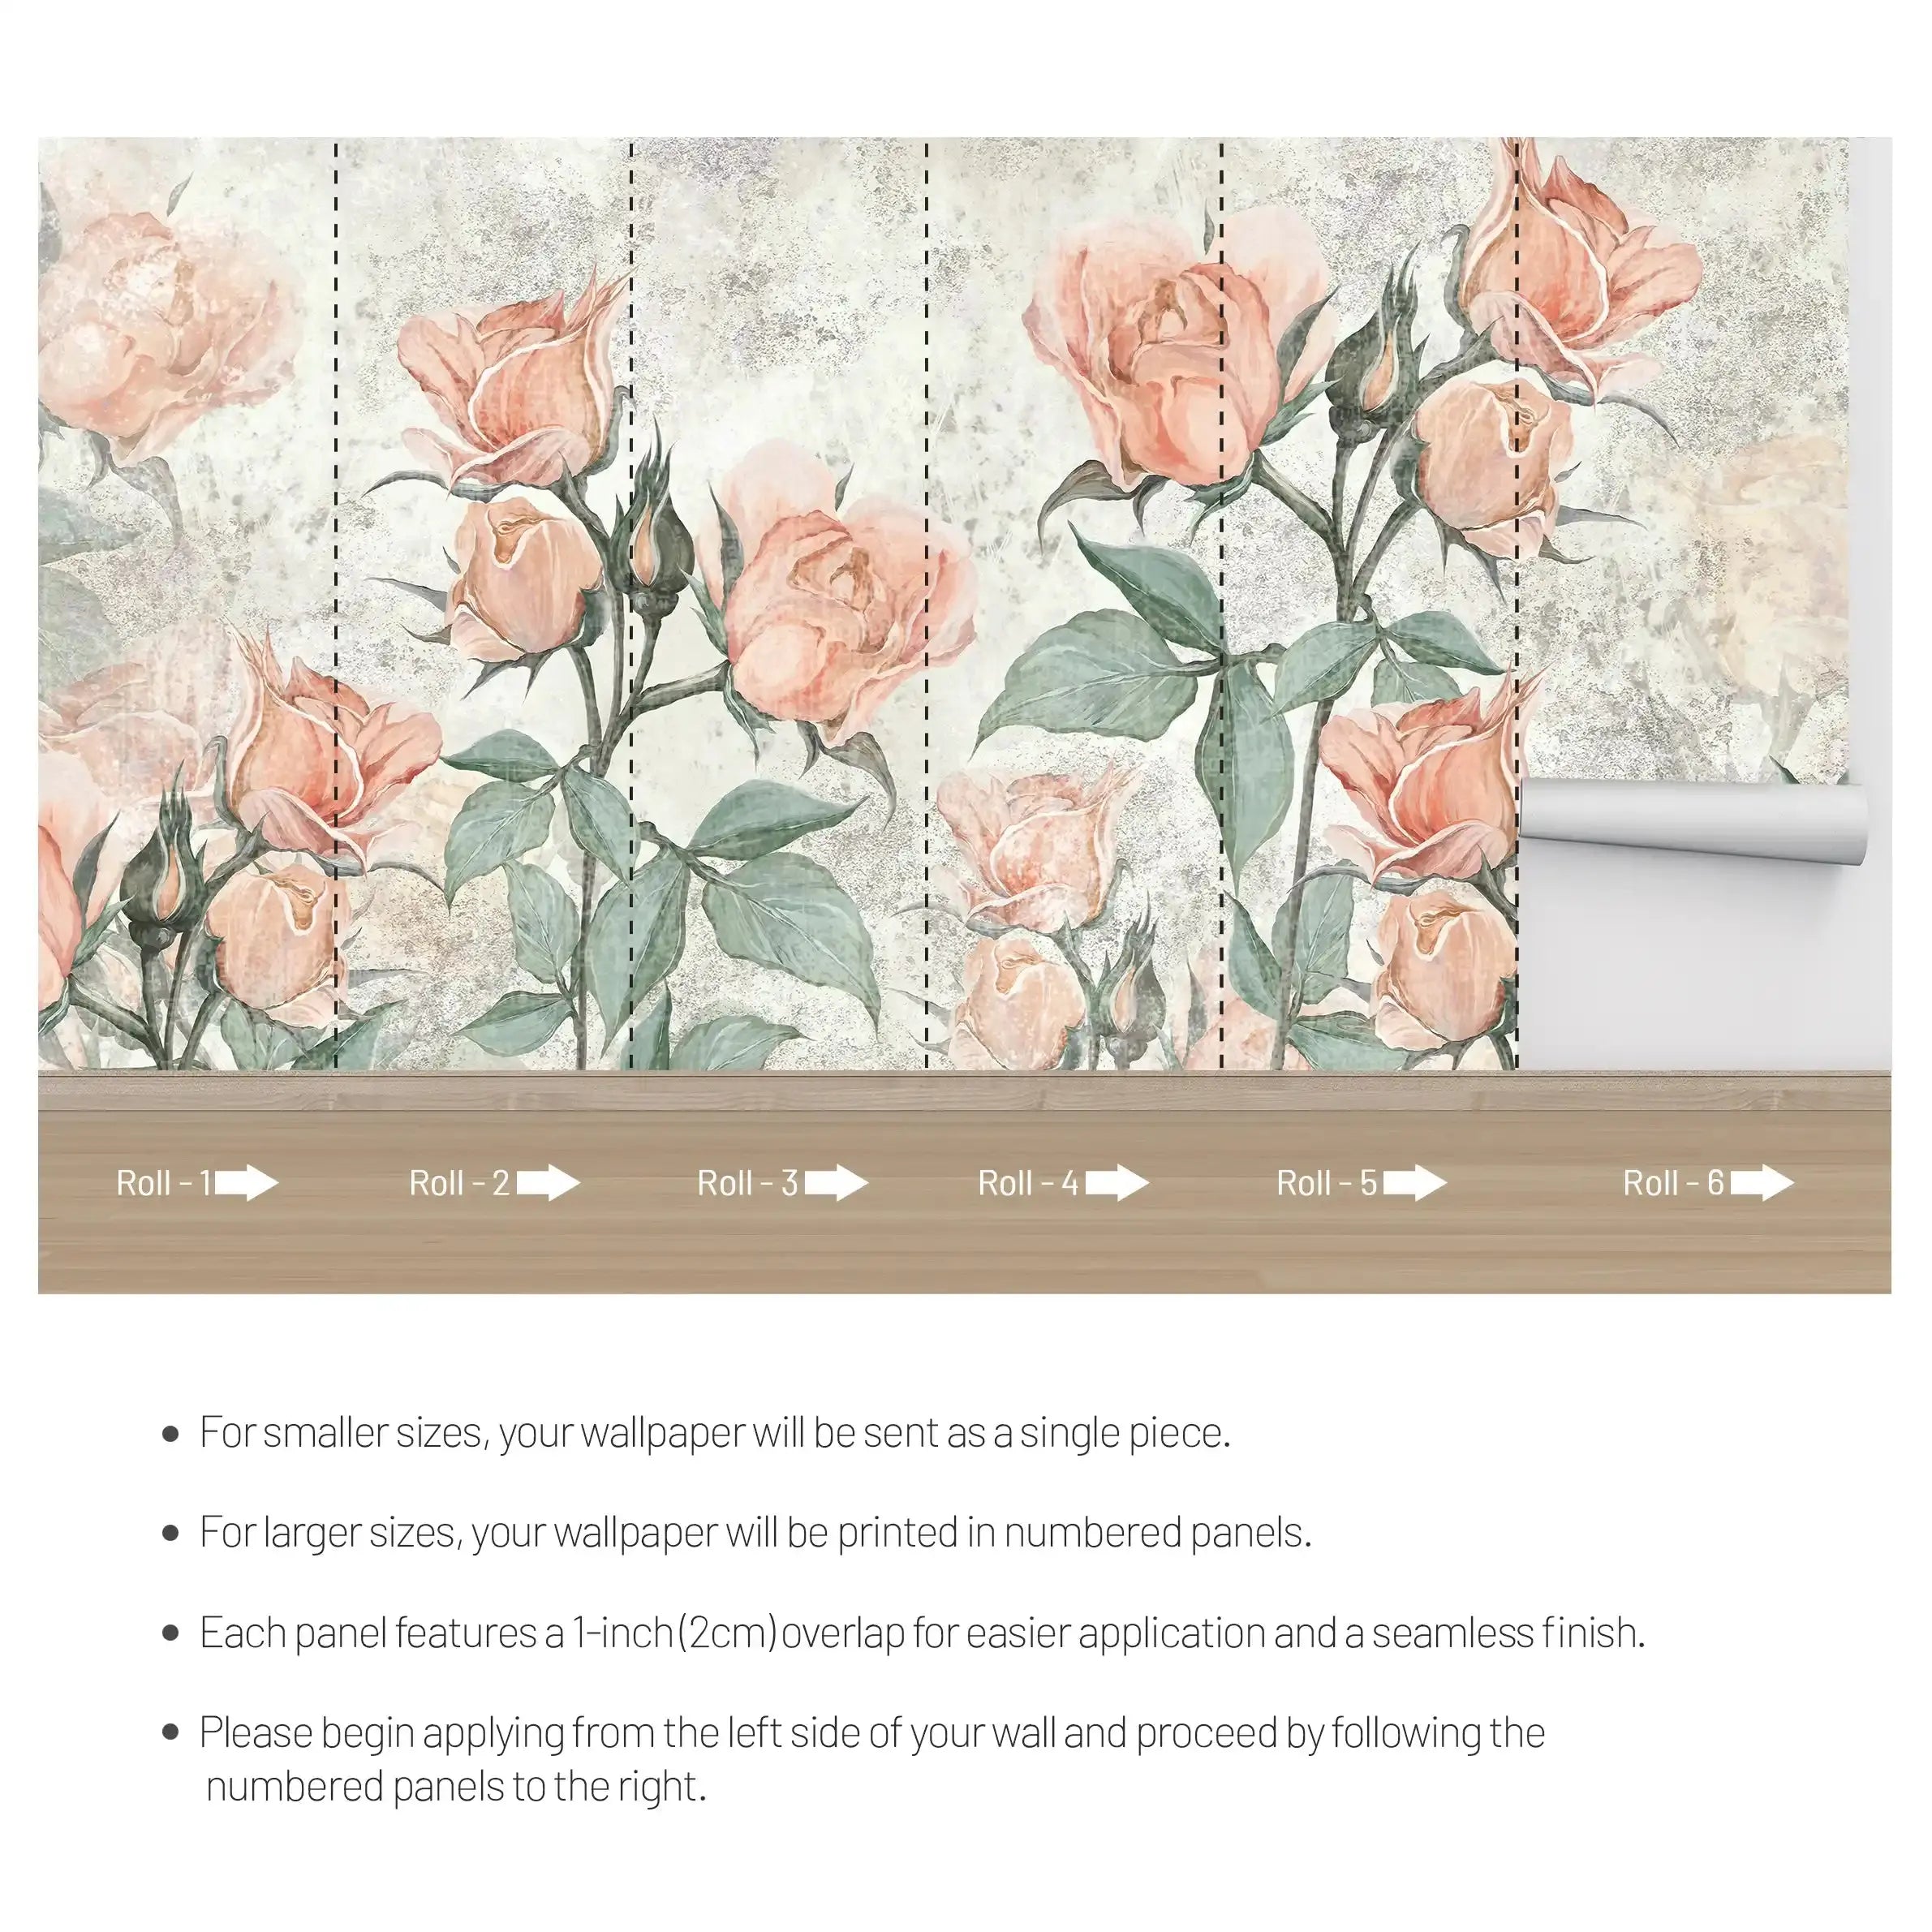 3002-B / Floral Peel and Stick Wallpaper - Orange Roses Mural, Vintage Mural for Wall Decor, Ideal for Bedroom and Bathroom - Artevella